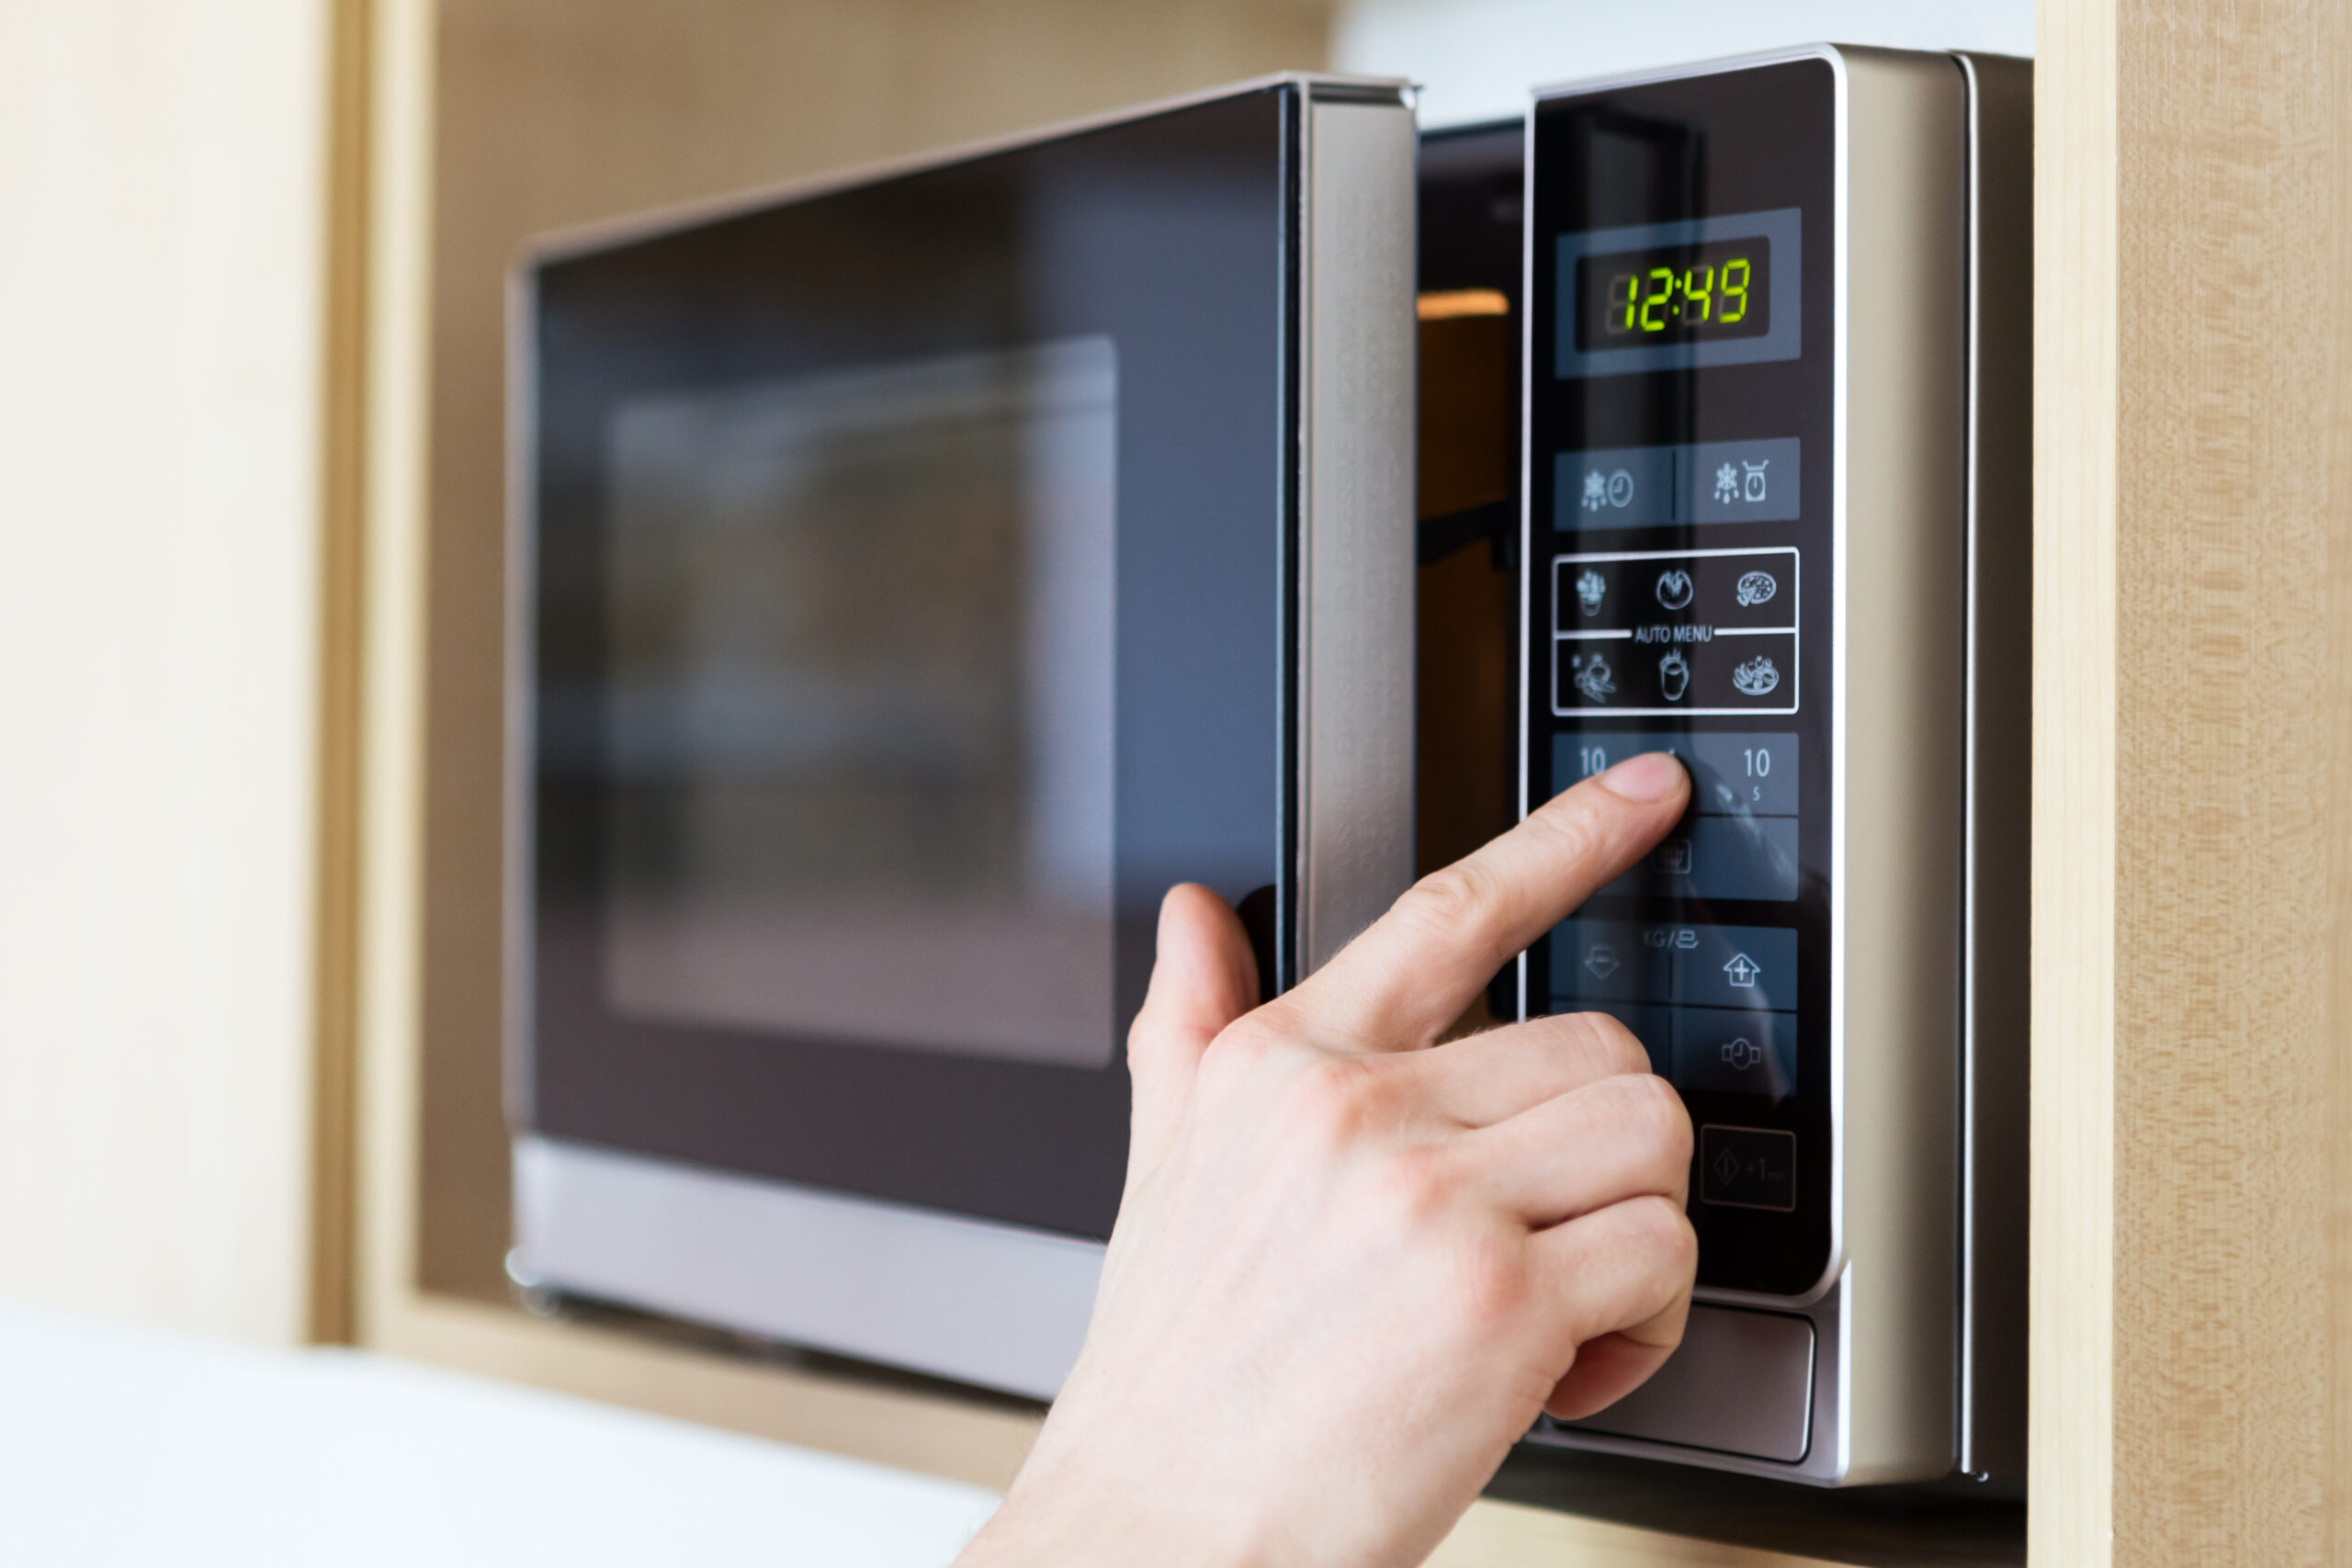 Is Microwave Oven Cooking Harming Your Health?